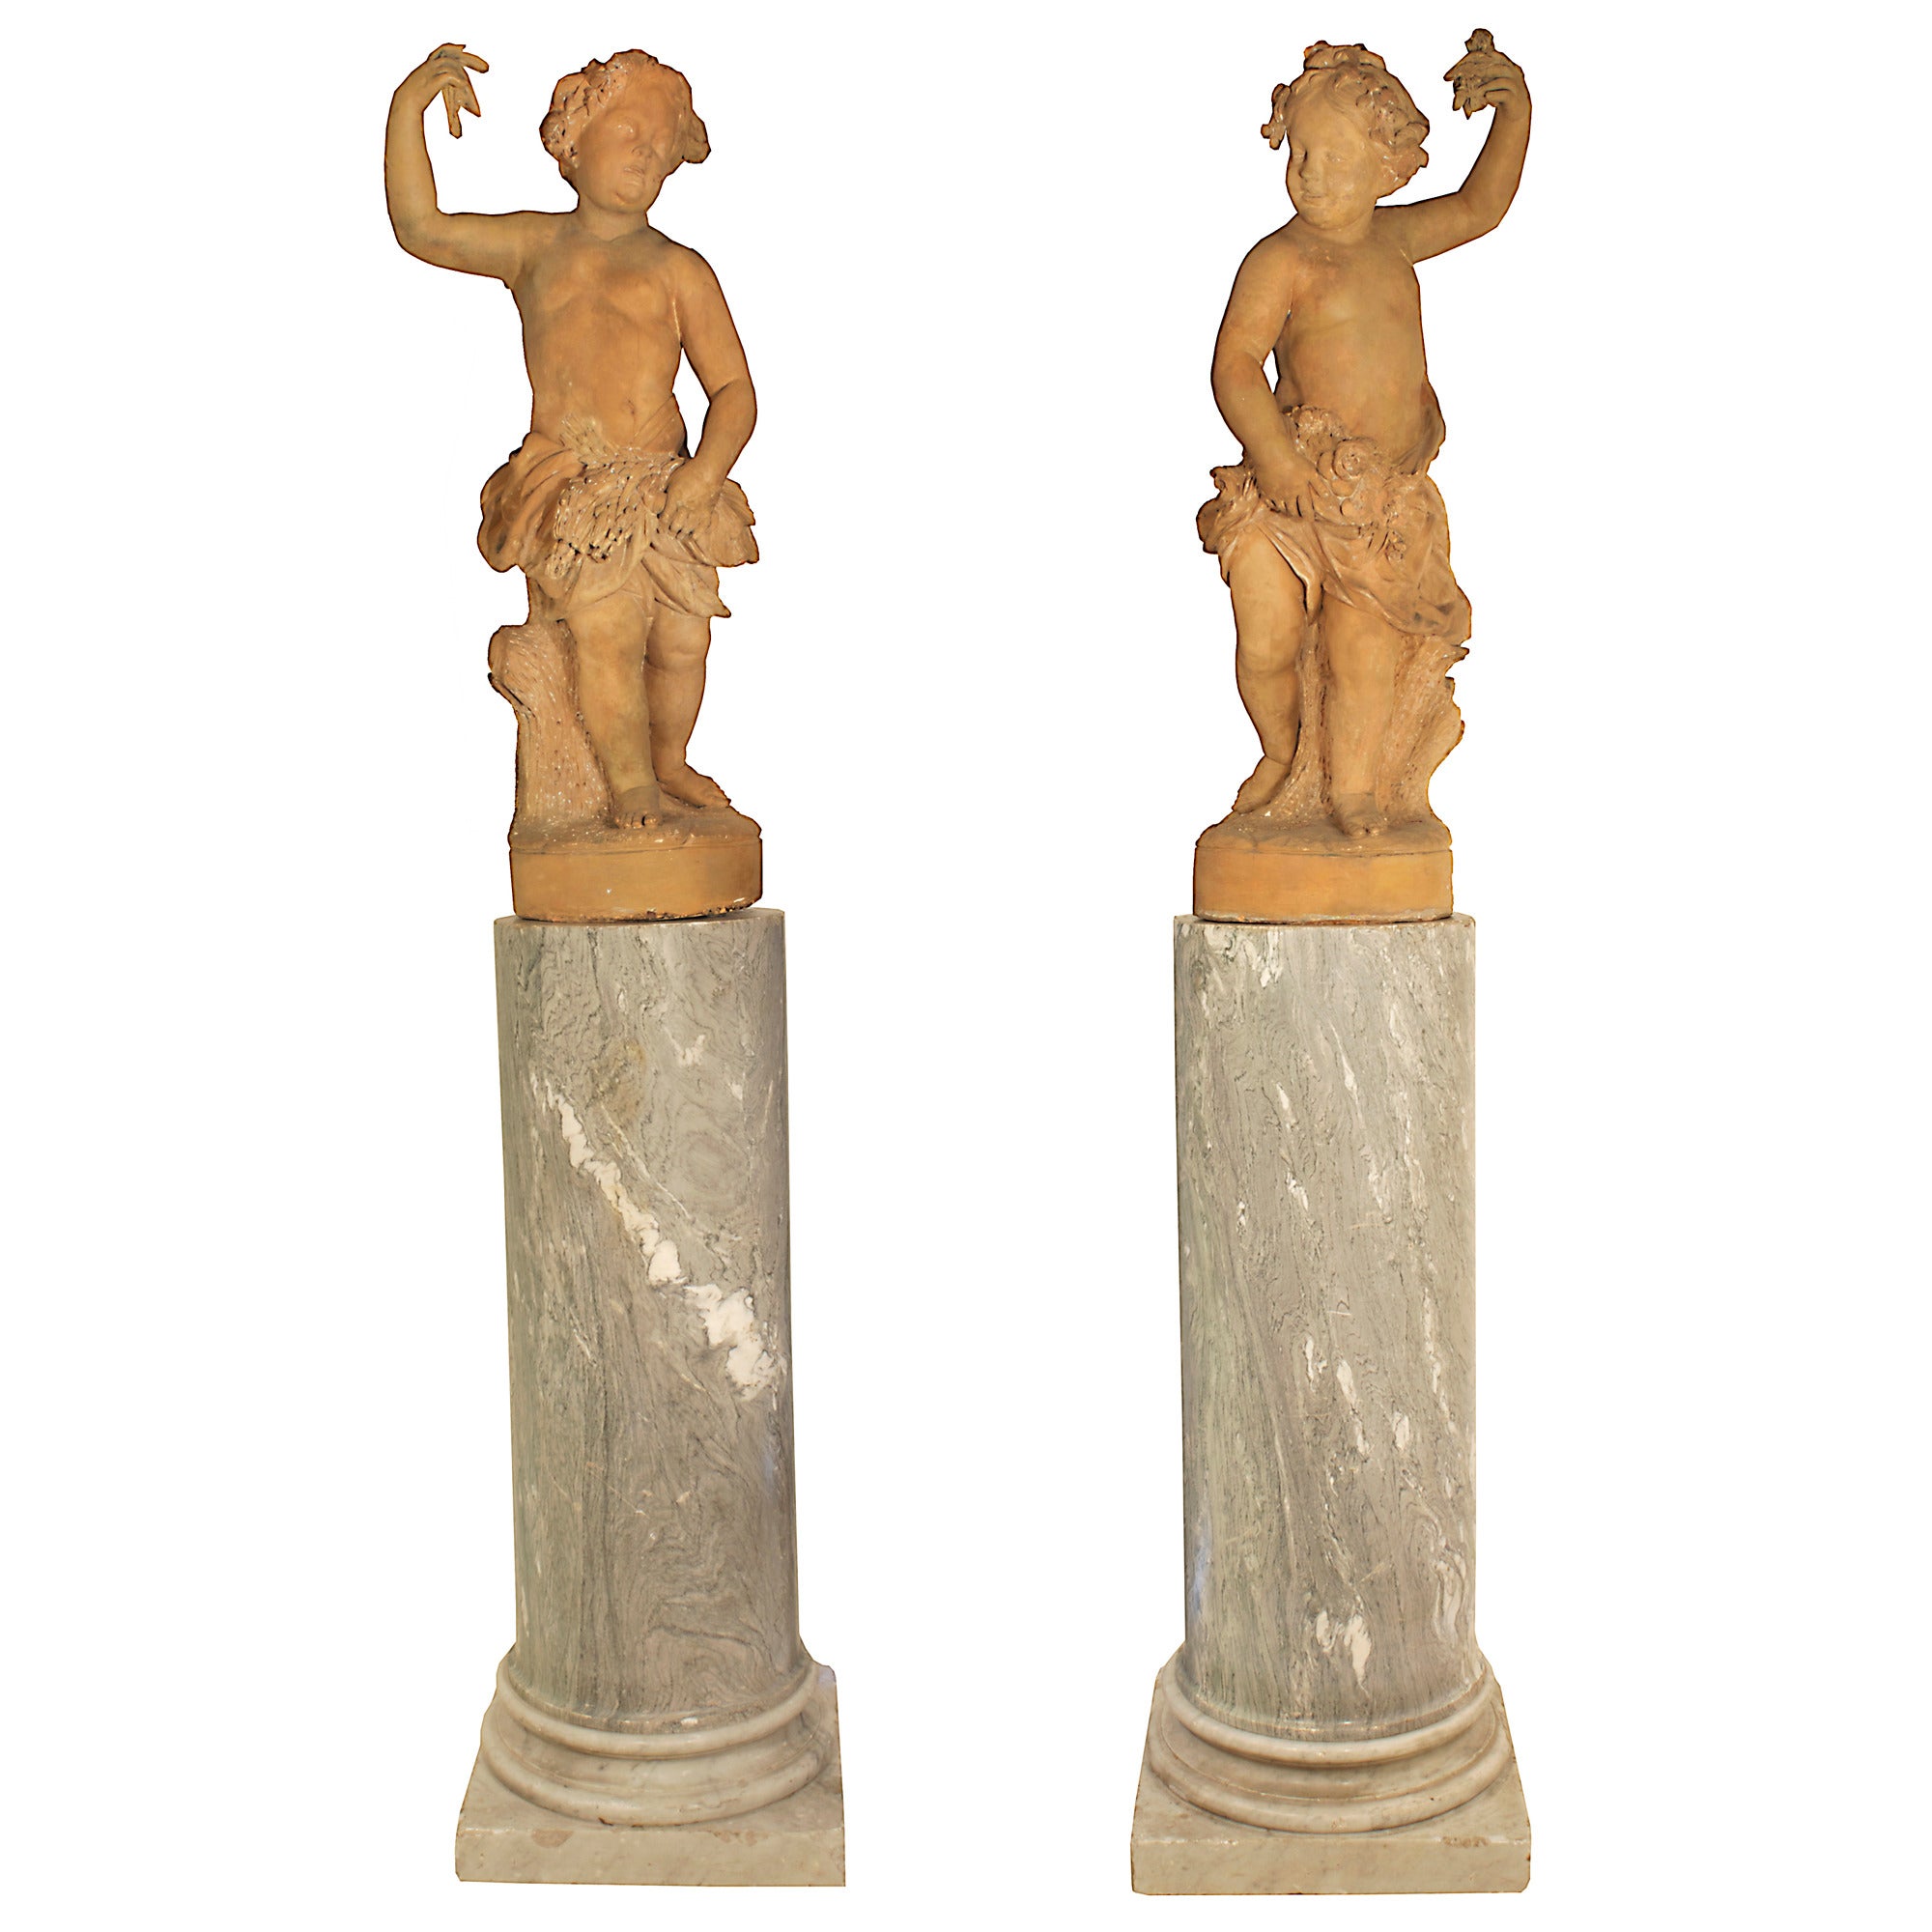 A Pair of Large Scale French Mid 18th Century Terracotta Statues